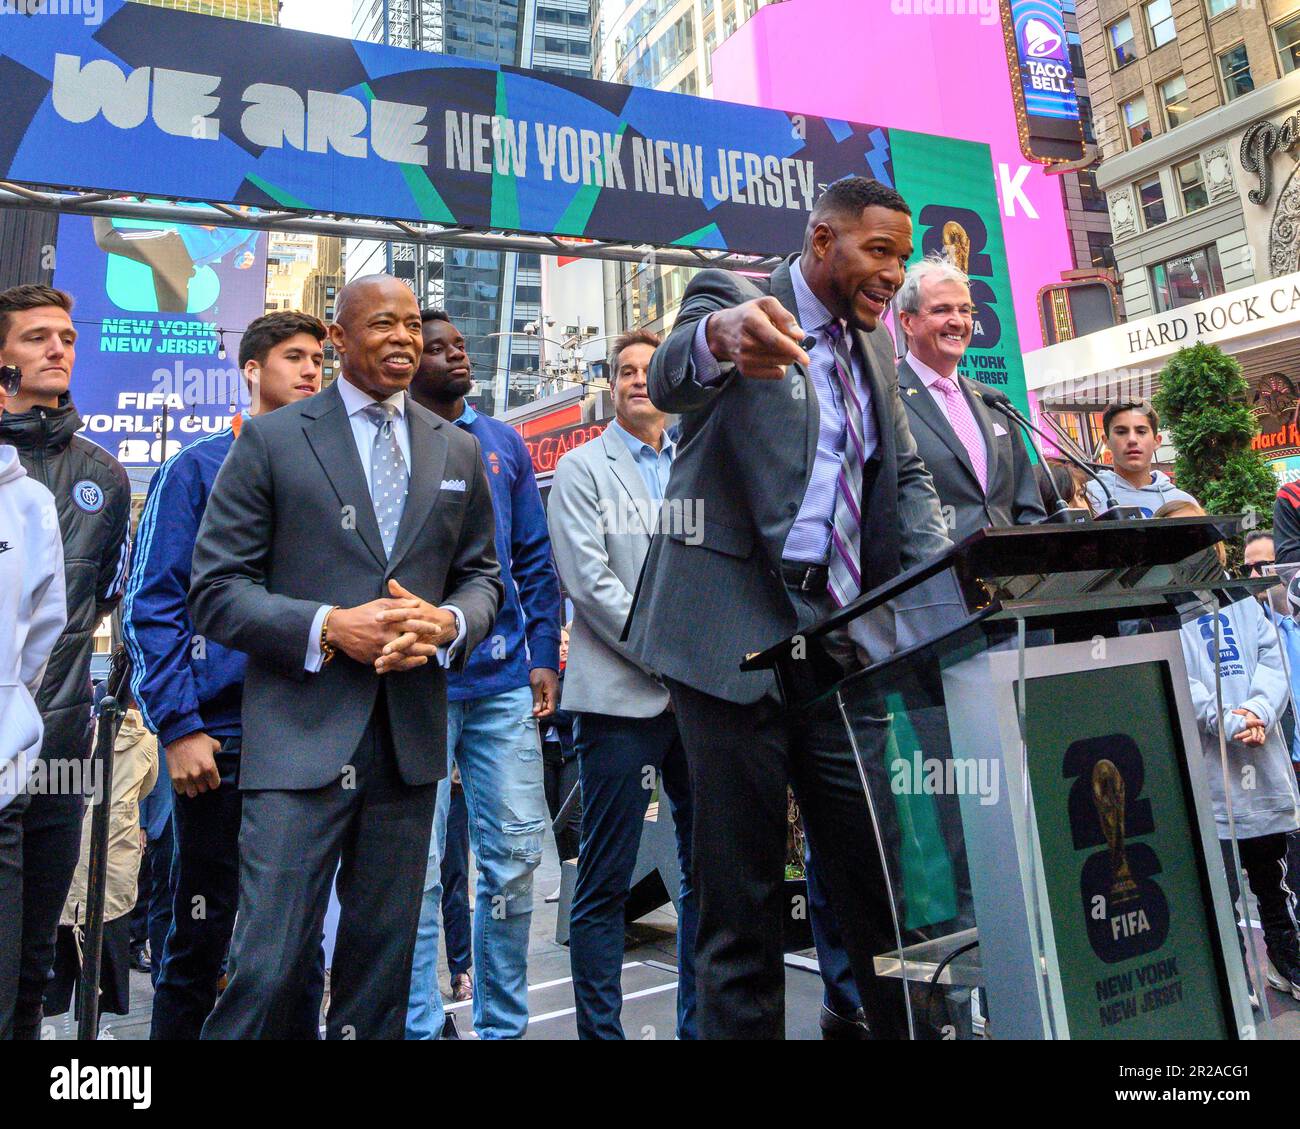 New York, USA. 18th May, 2023. Former footballer Michael Strahan (C) is flanked by New York City Mayor Eric Adams (L) and New Jersey Governor Phil Murphy (R) at a FIFA World Cup 2026 New York/New Jersey Launch Event in Times Square. The event unveiled the official themes for the MetLife stadium matches: 'We are NYNJ' and 'We are 26'. The world's top soccer competition is already planning to host 8 matches in the New York/New Jersey area and the local organizers want to host the final game here too. Credit: Enrique Shore/Alamy Live News Stock Photo